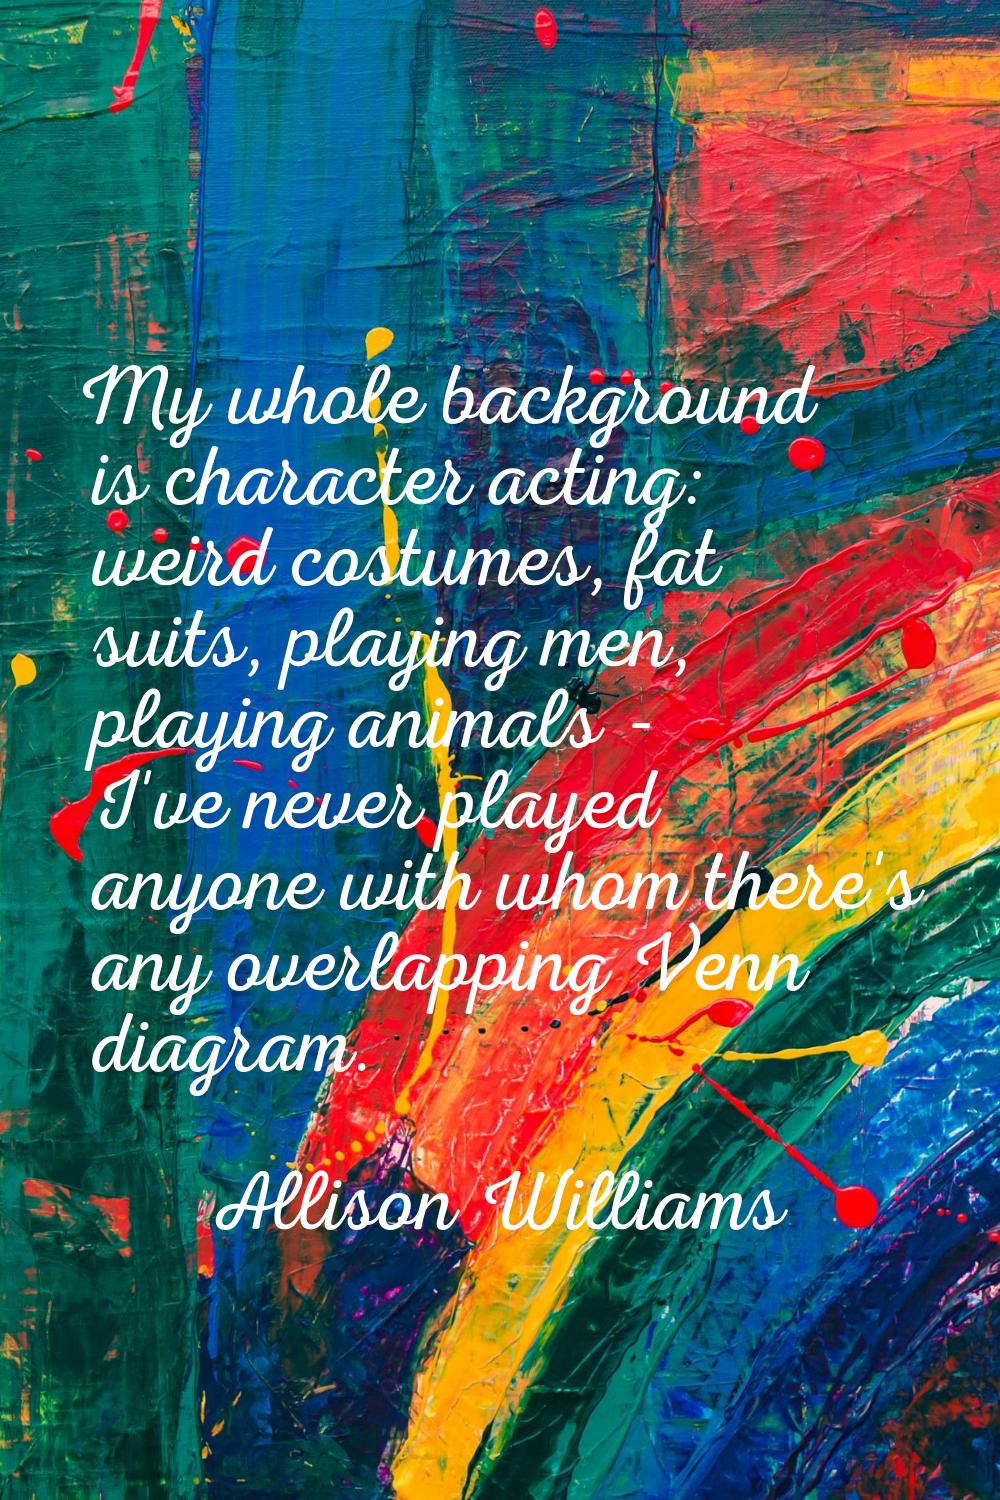 My whole background is character acting: weird costumes, fat suits, playing men, playing animals - 